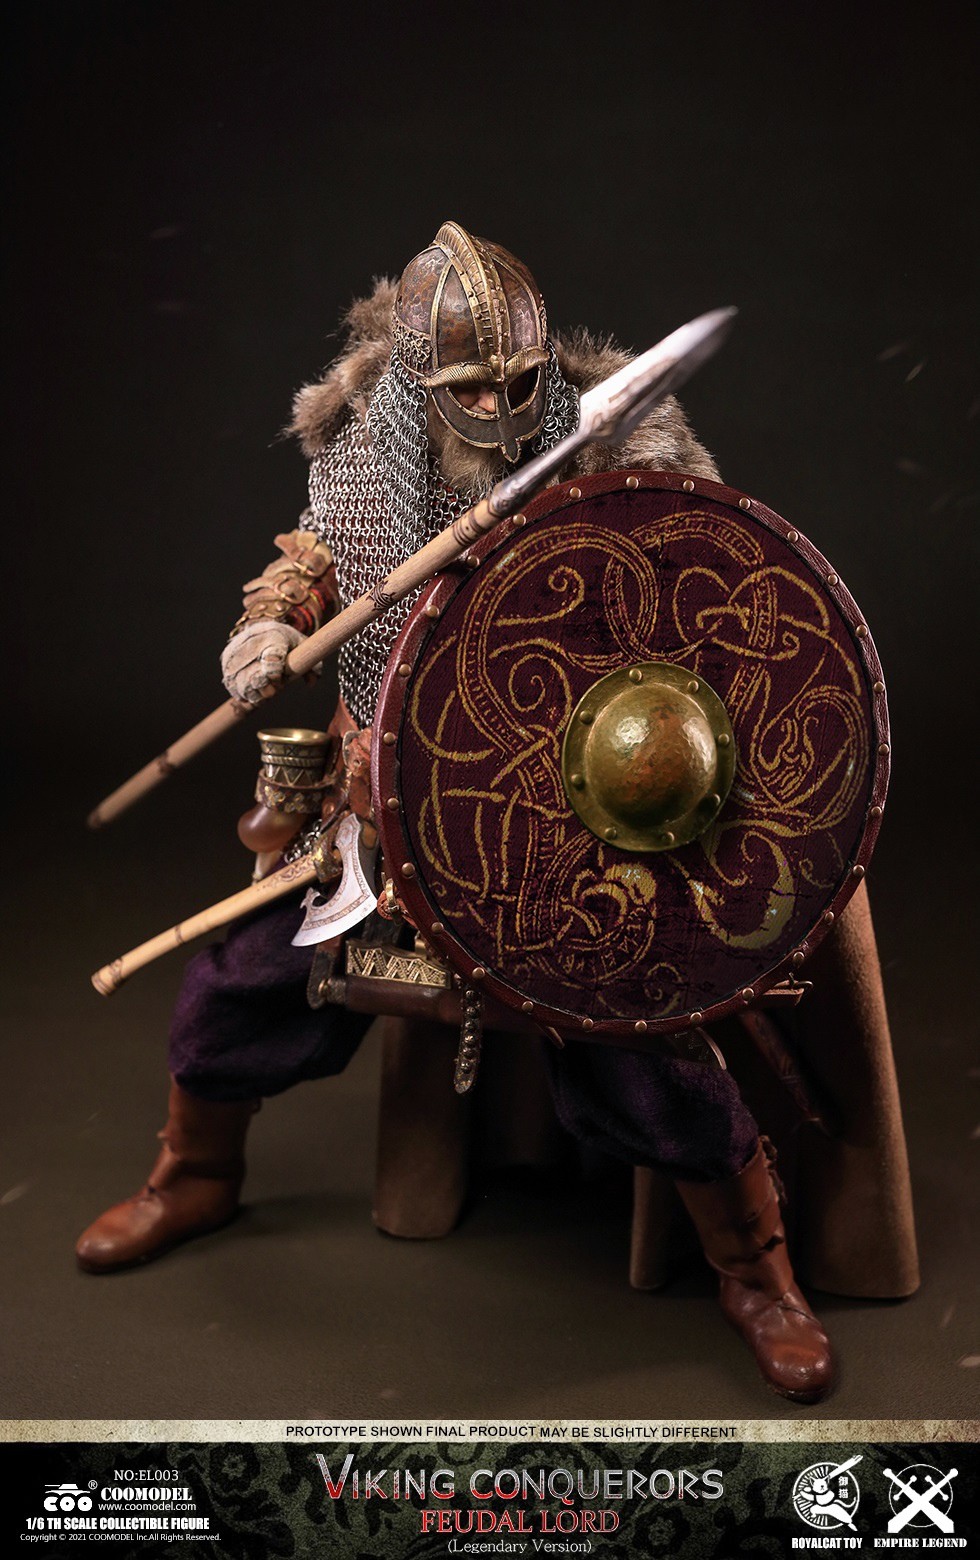 1/6 Scale CooModel Legends Of Empires Vikings Conqierors Feudal Lord Legendary Version EL003